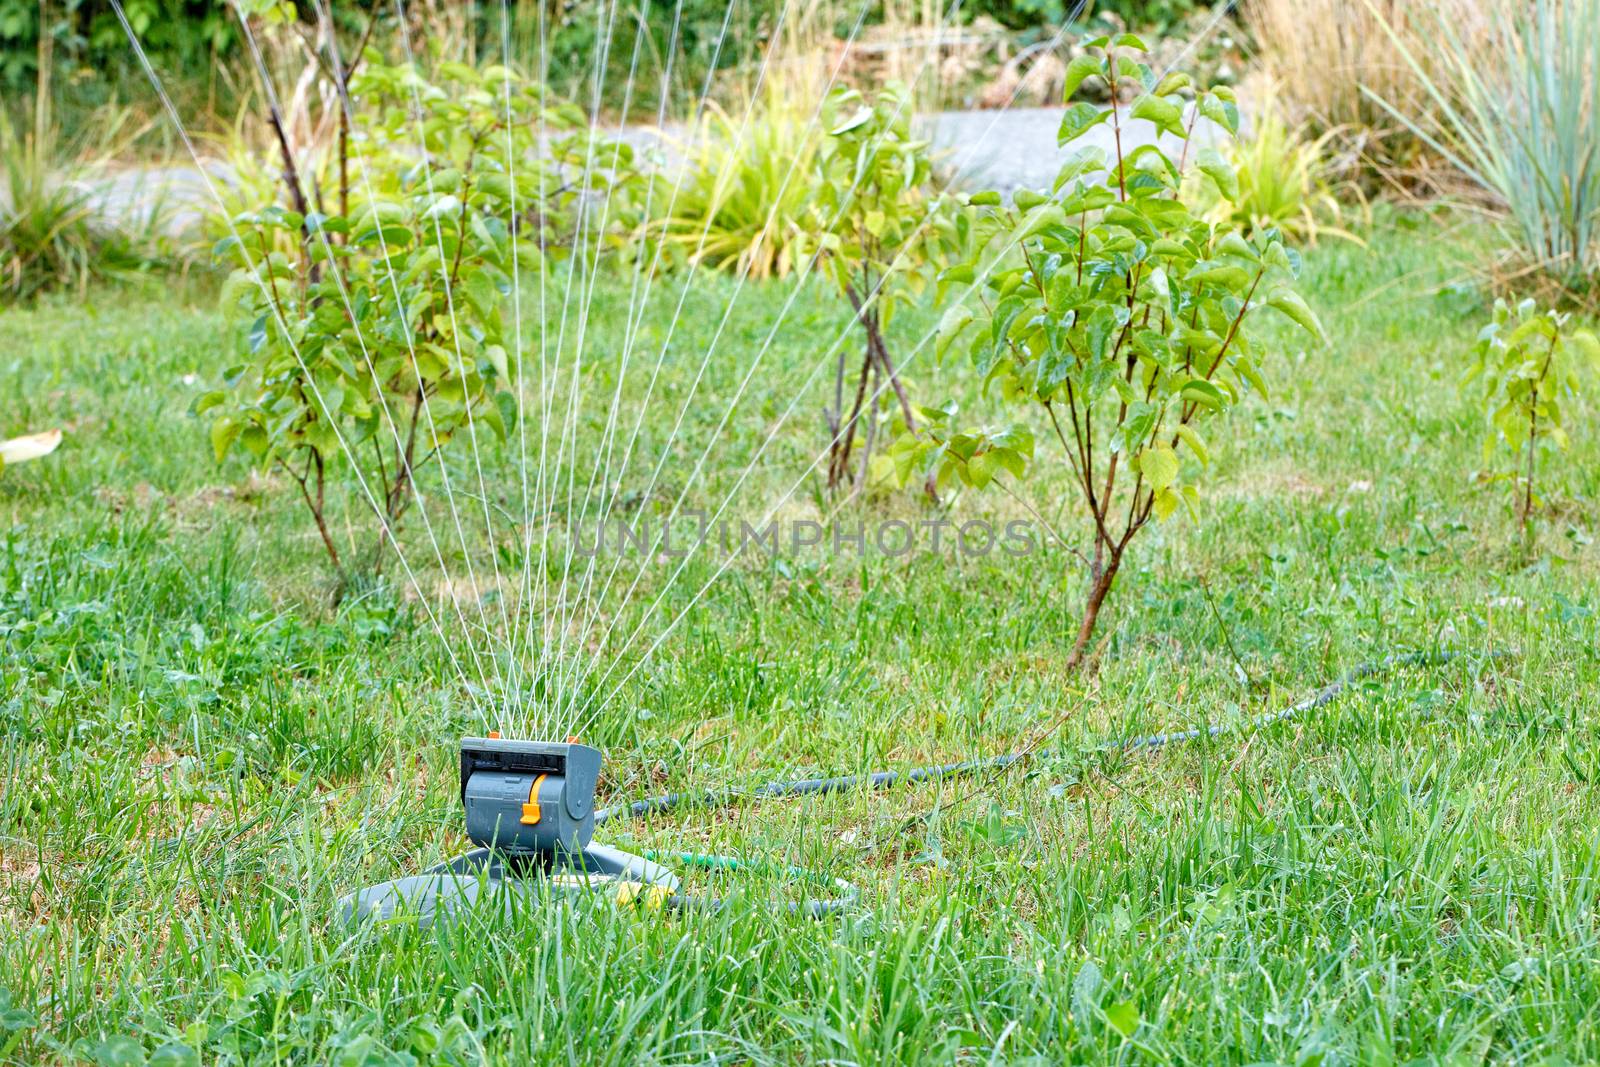 Oscillating watering of a young garden on a summer afternoon. by Sergii